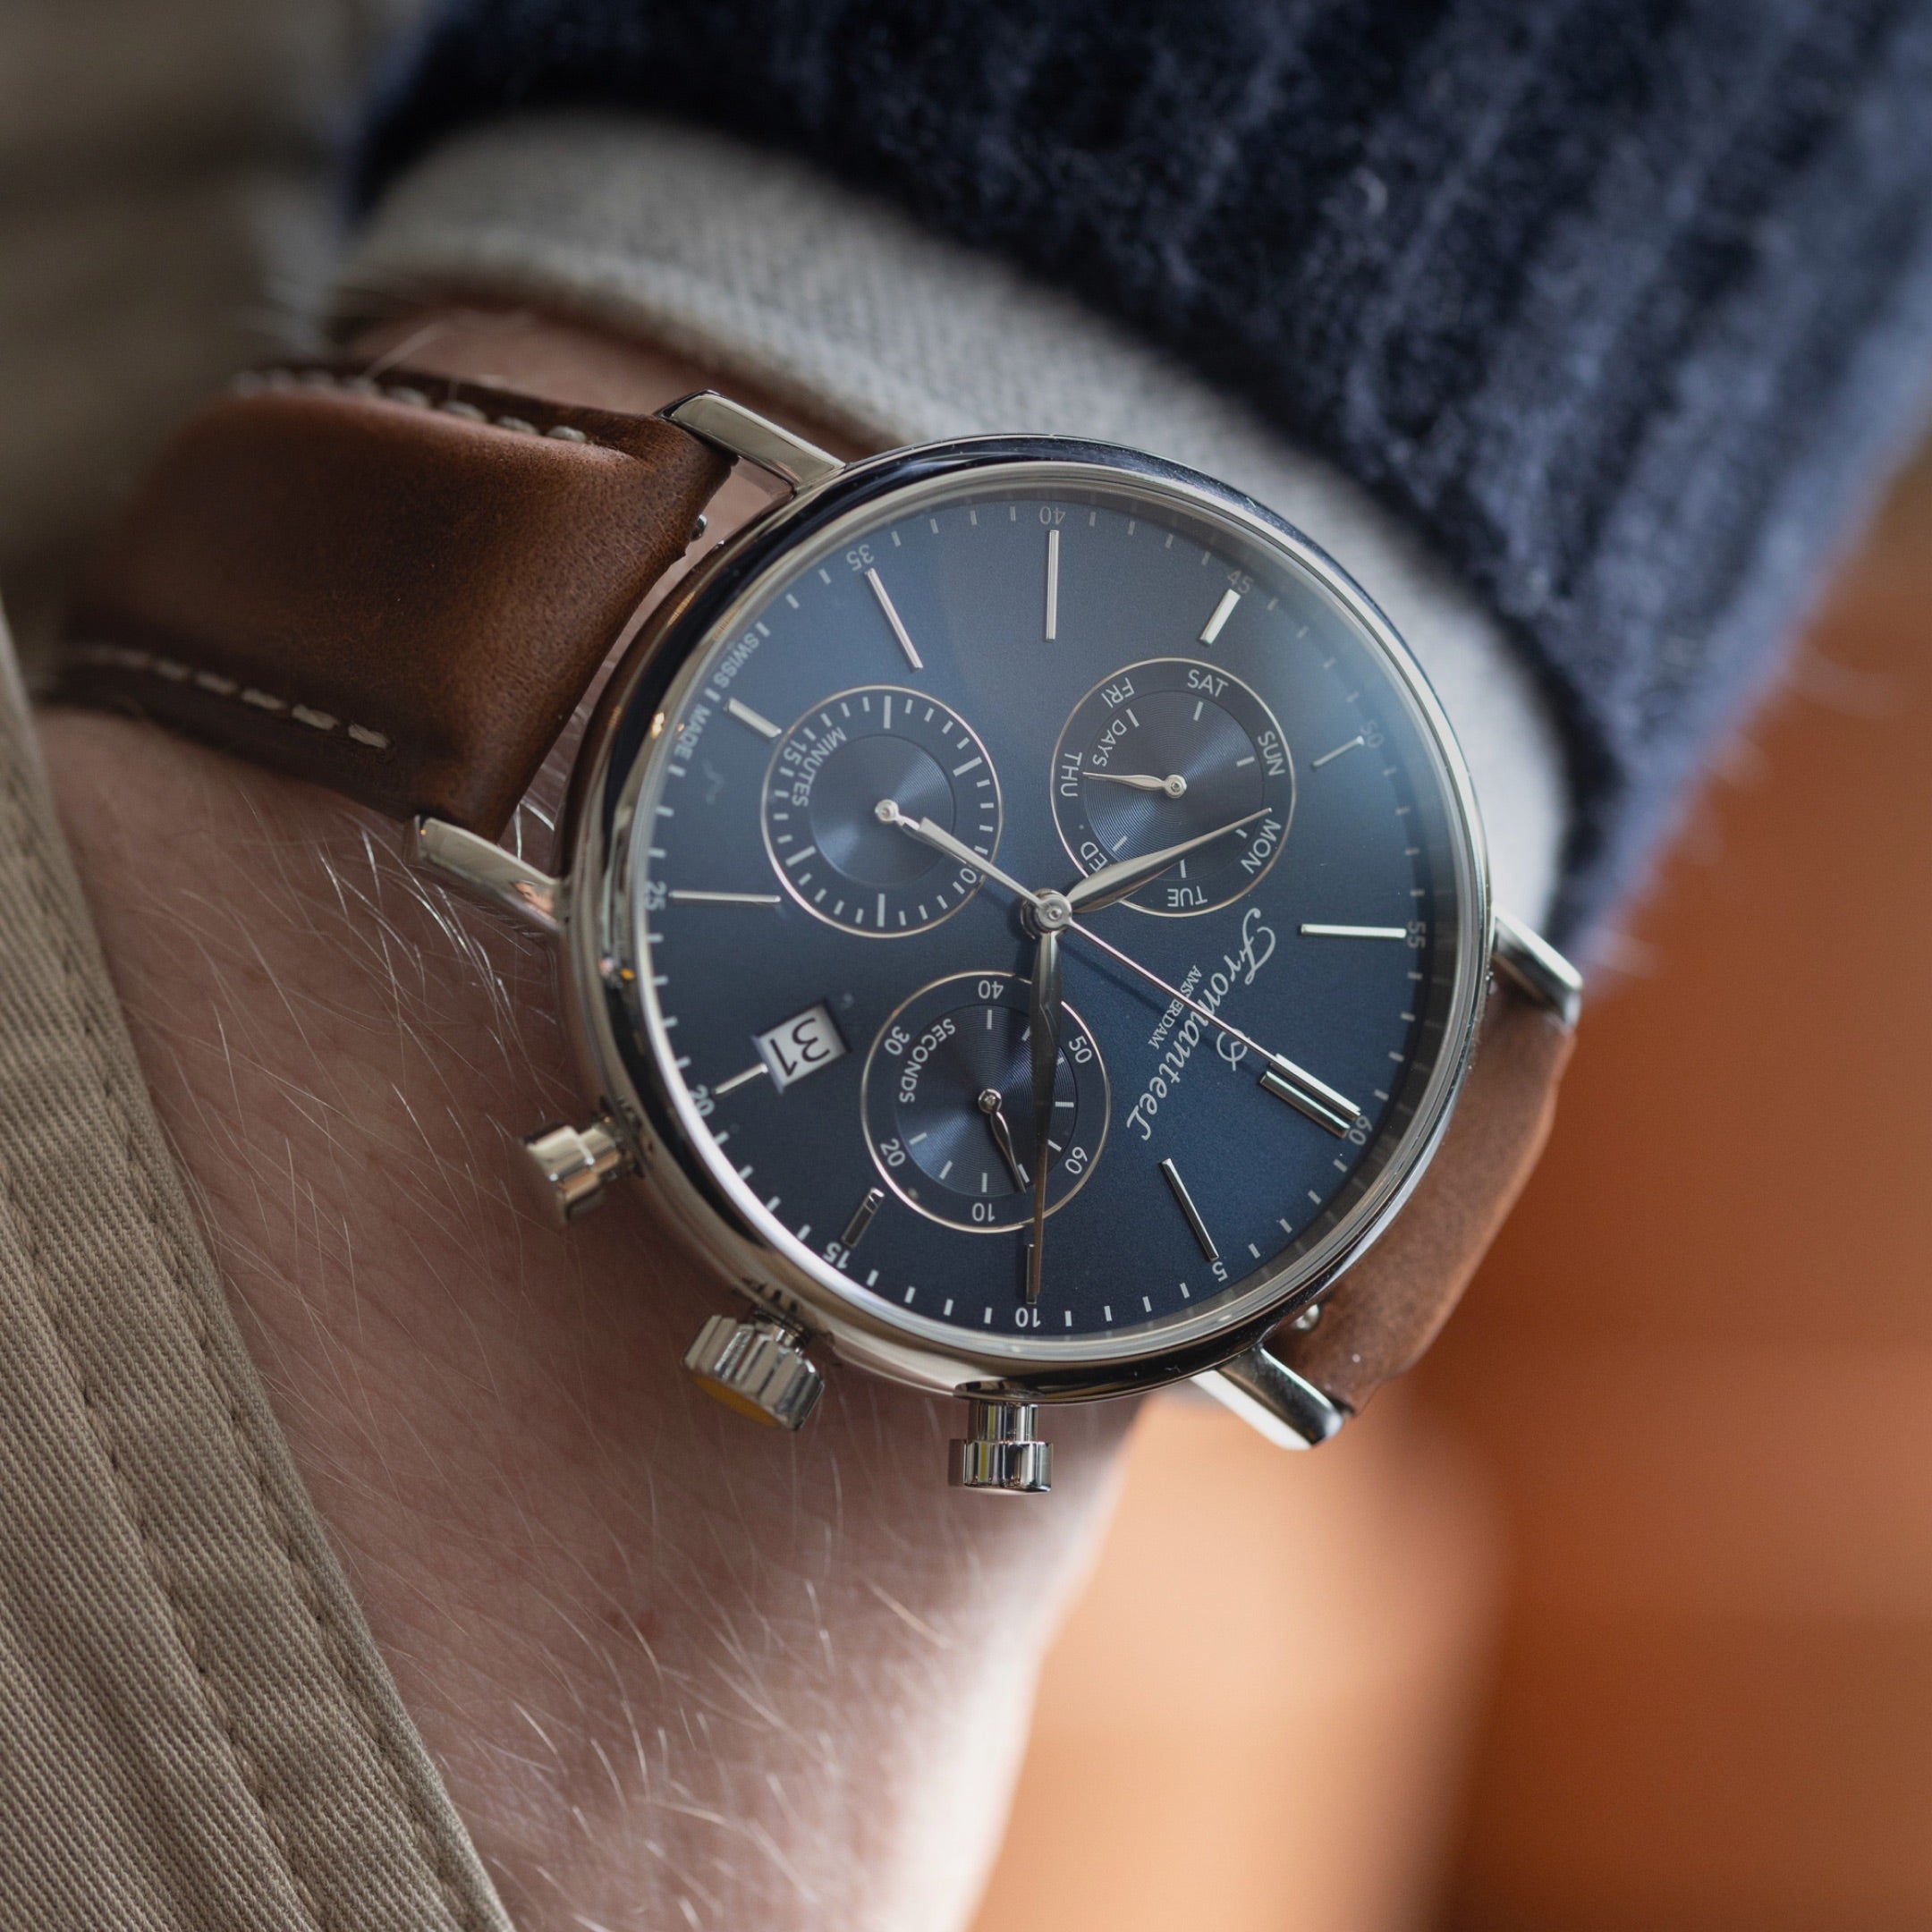 The Fromanteel Chrono Blue on the Wrist